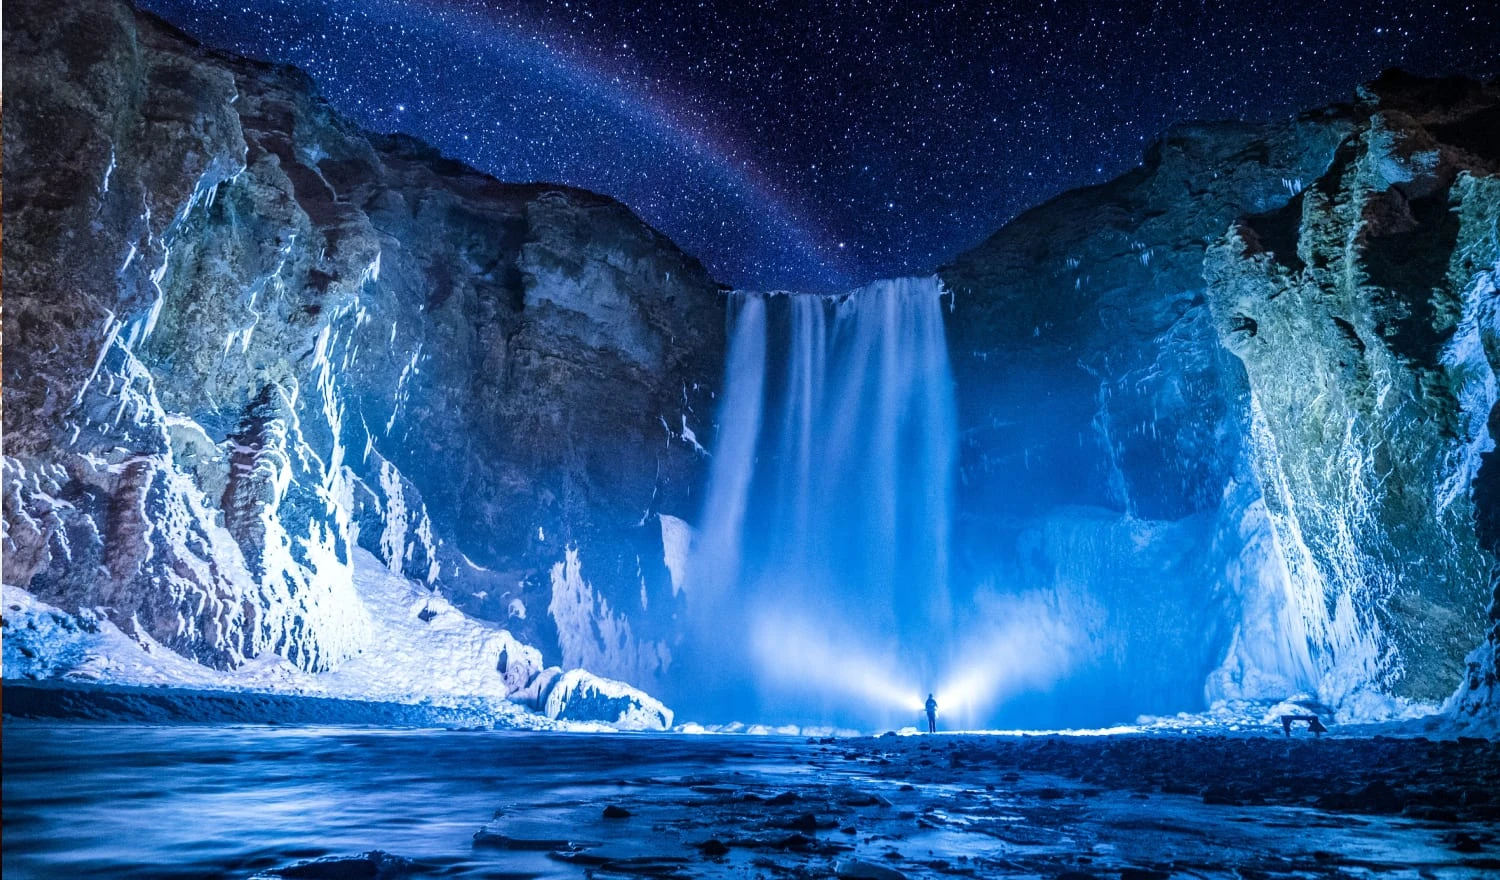 Person in front of waterfalls during night time